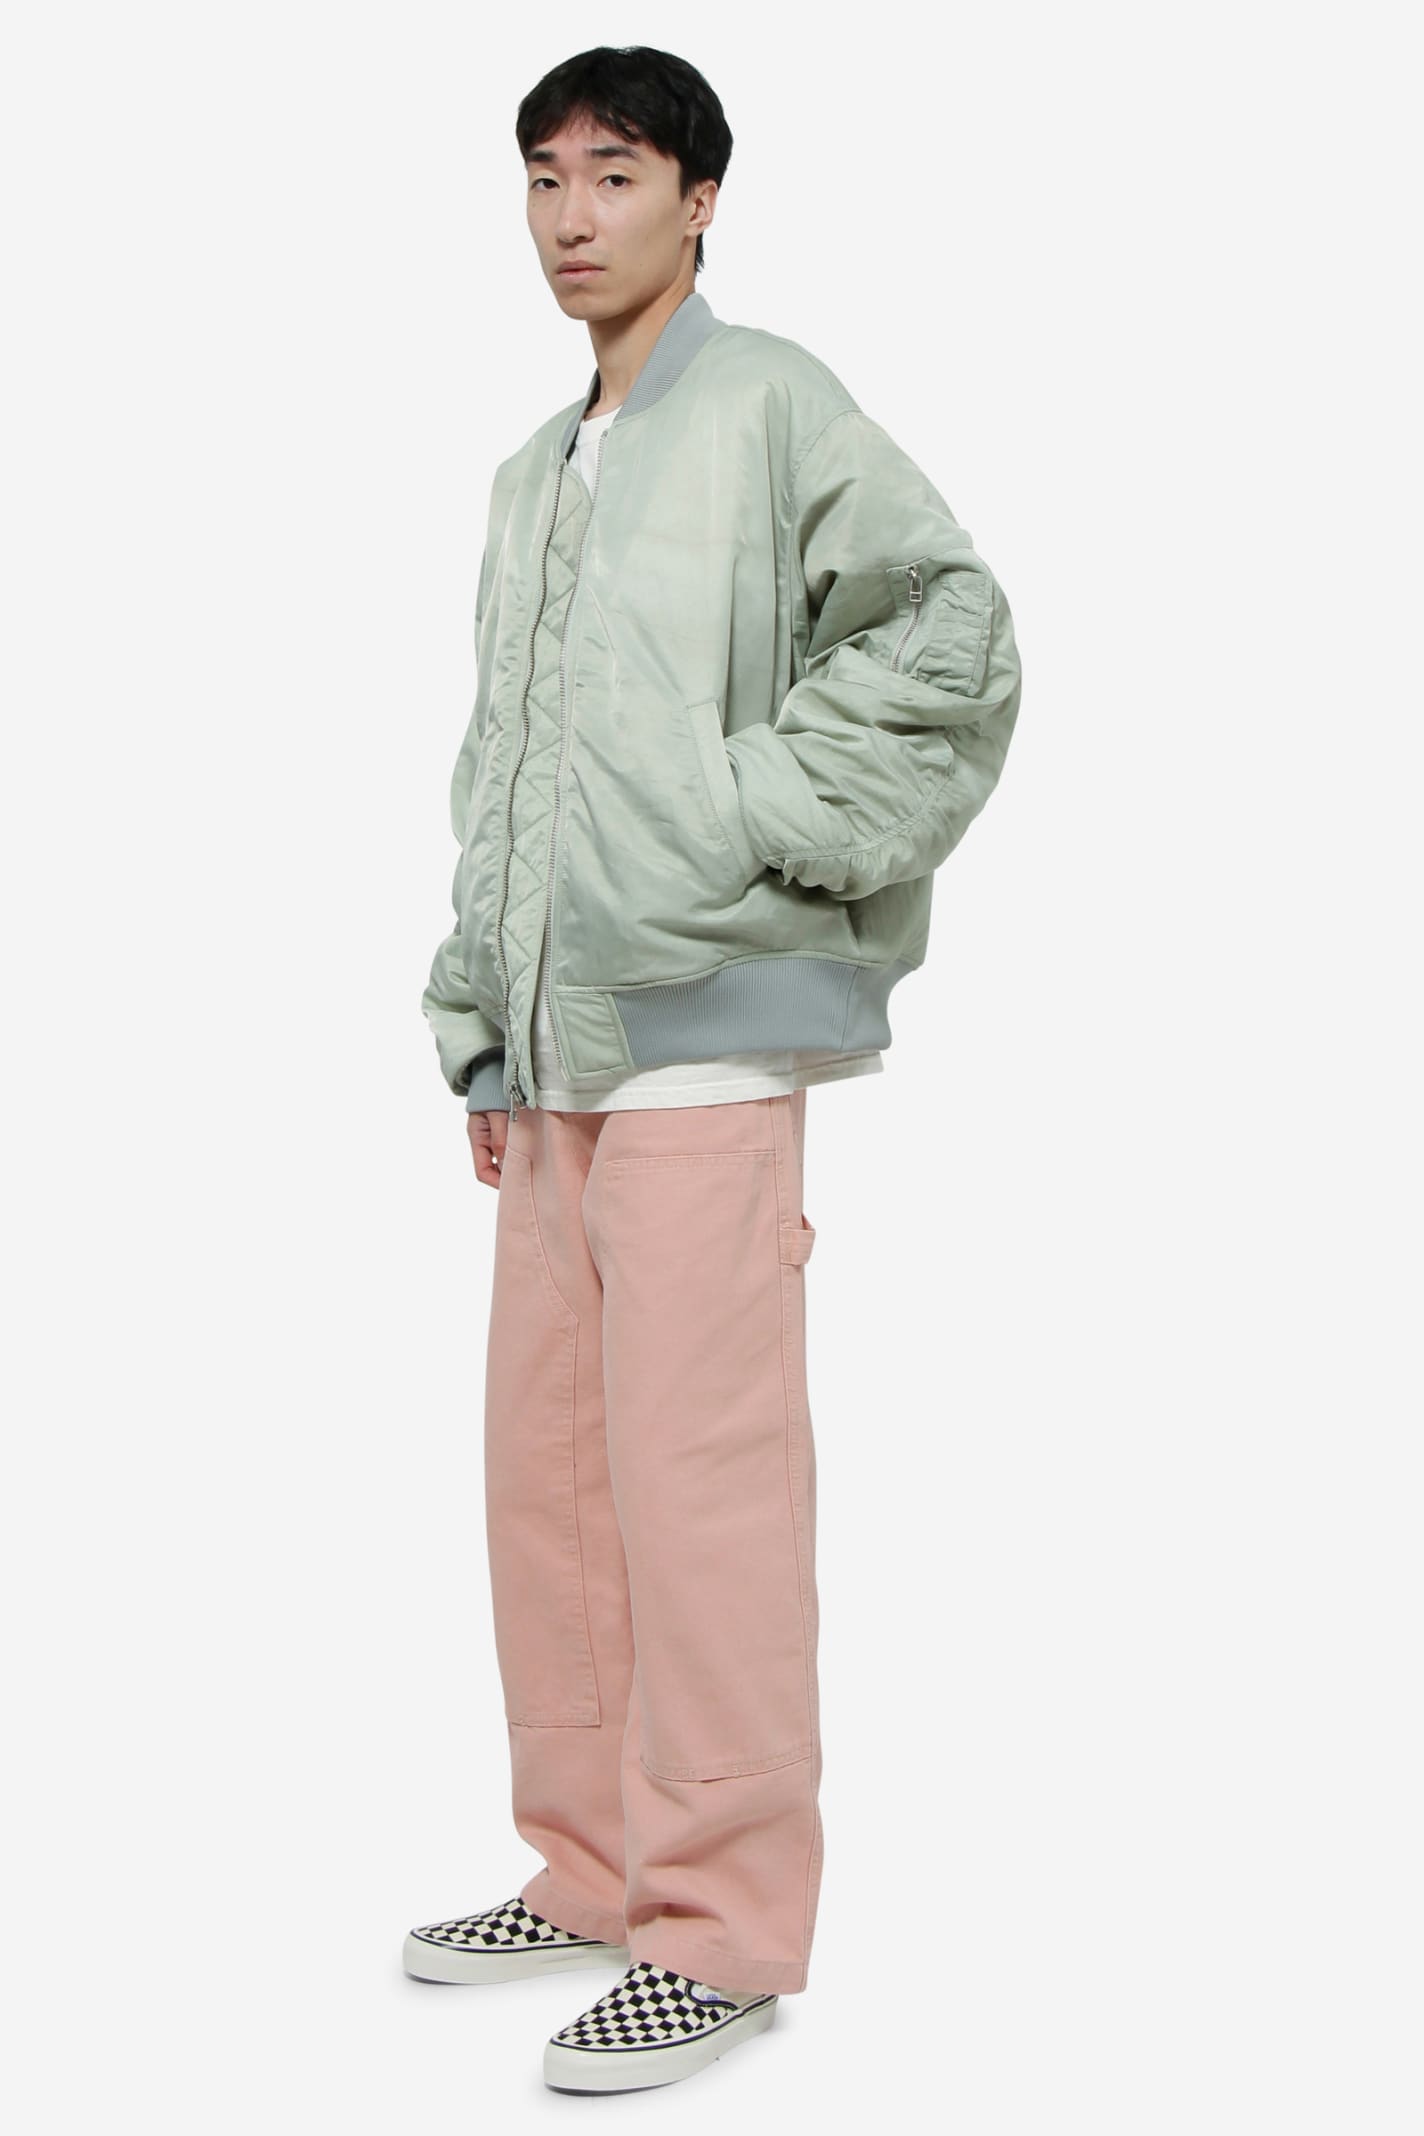 Canvas Work Pants In Pink